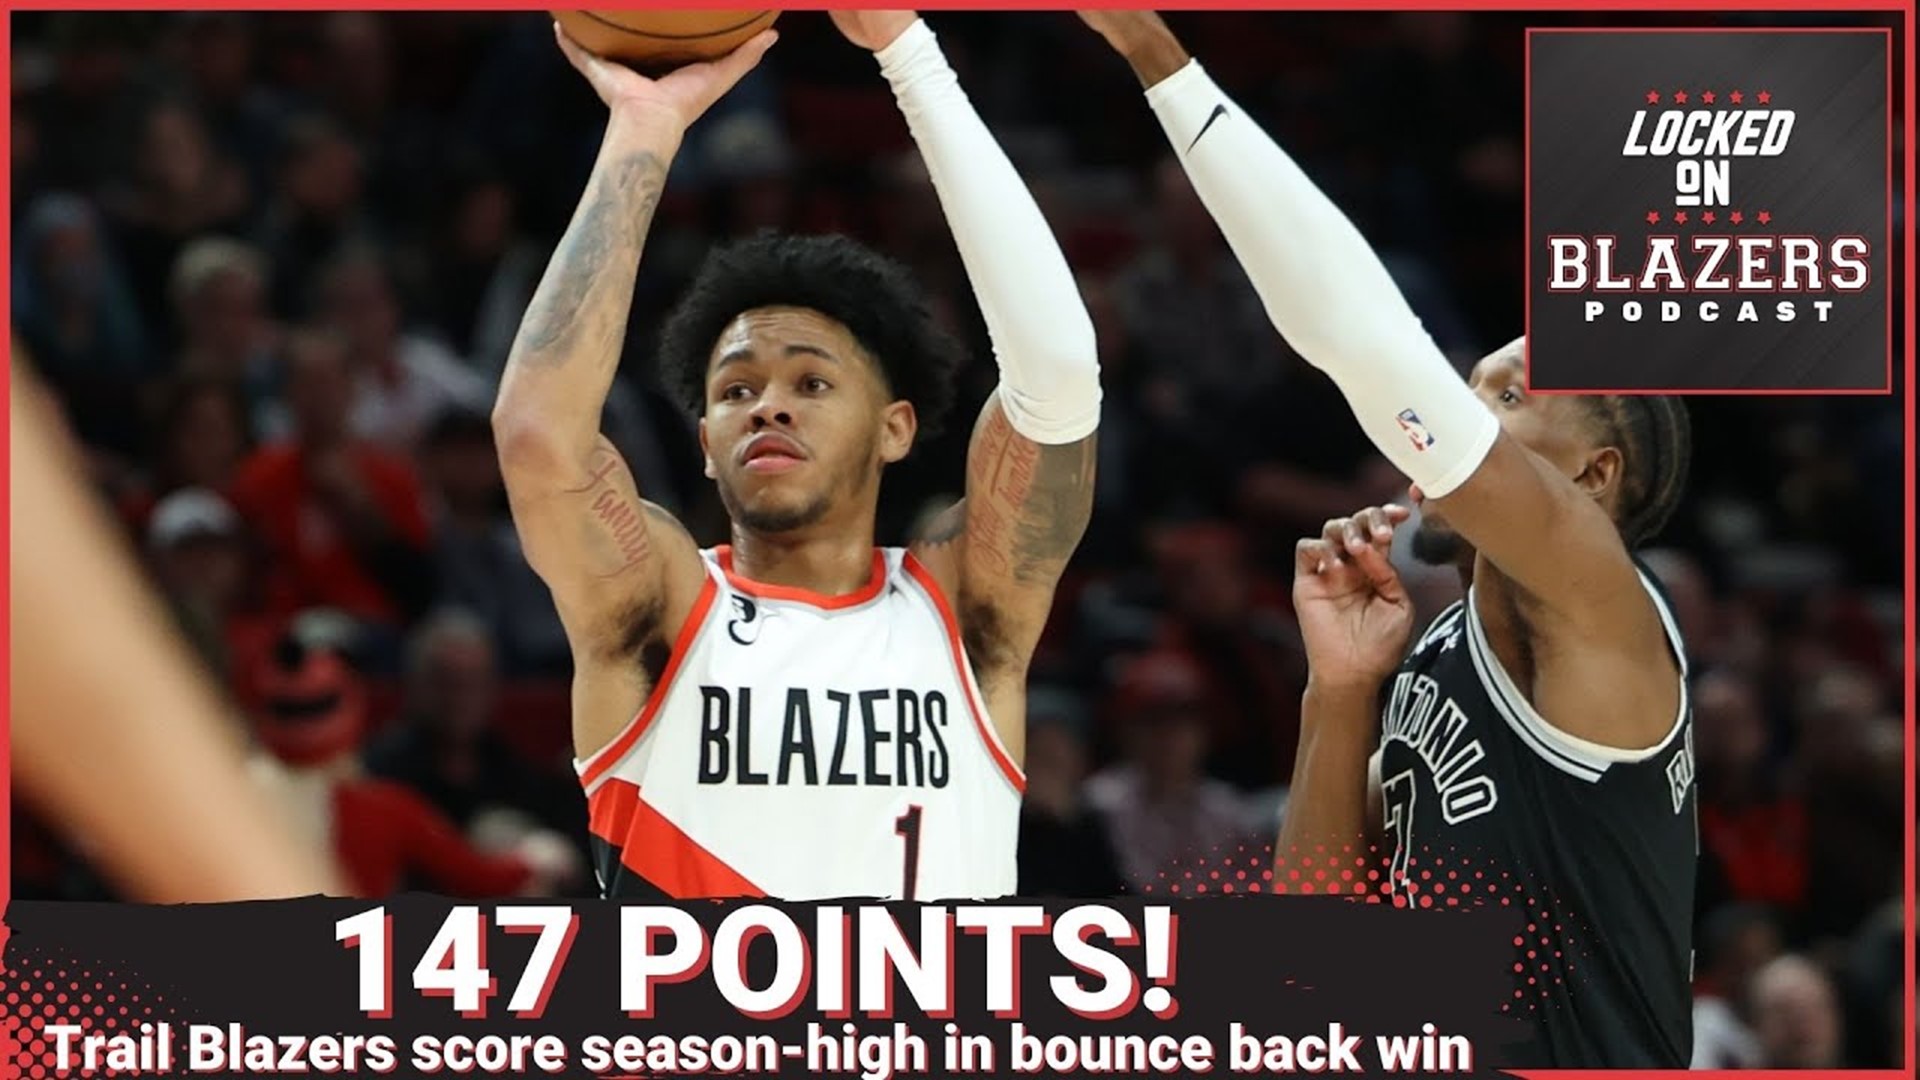 Did the Blazers play well? Not really. Does it matter? Not right now! Just enjoy it. They needed one and they get one.